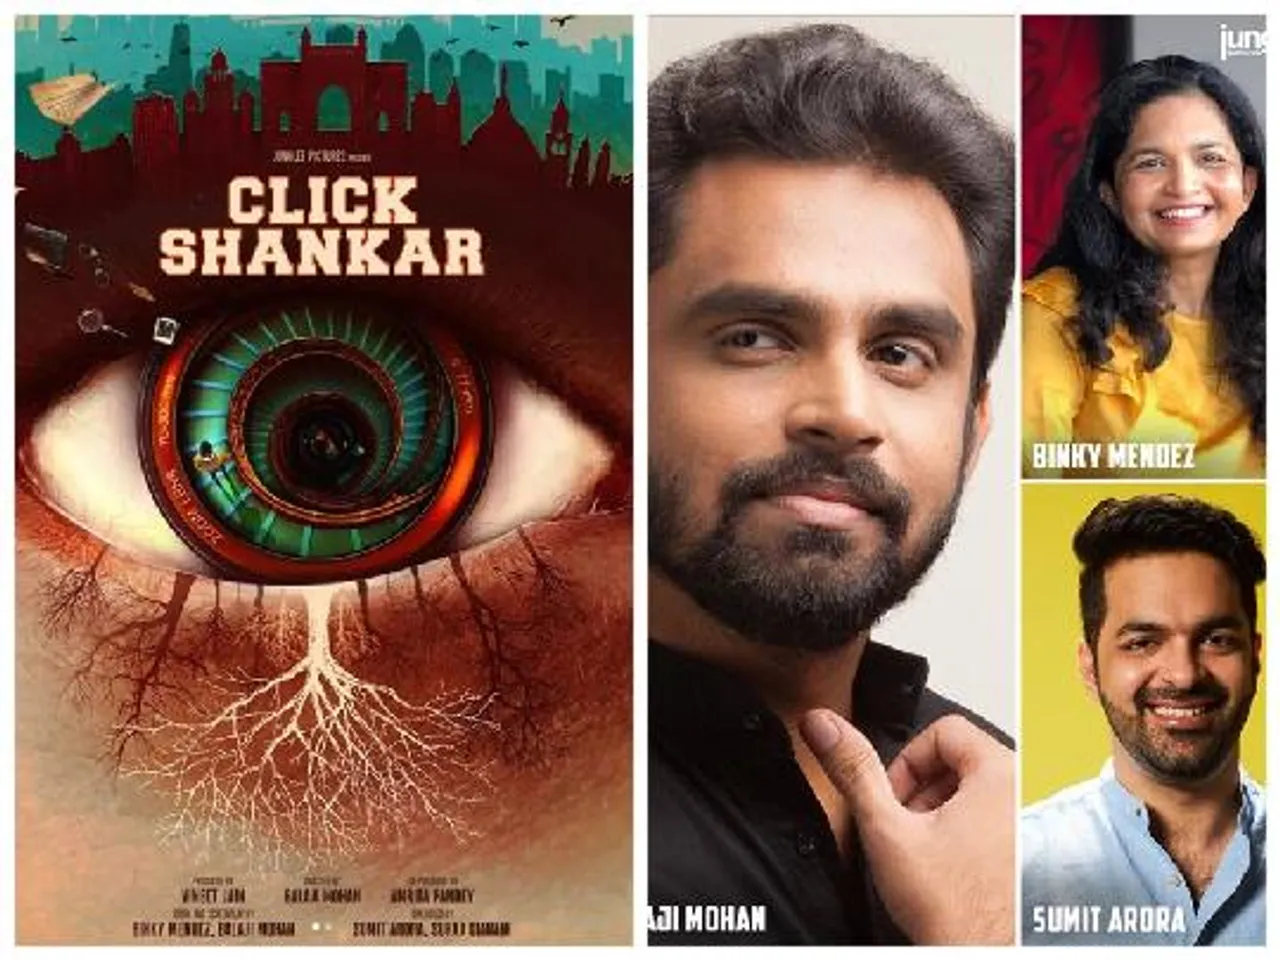 Junglee Pictures Announces Click Shankar With Balaji Mohan